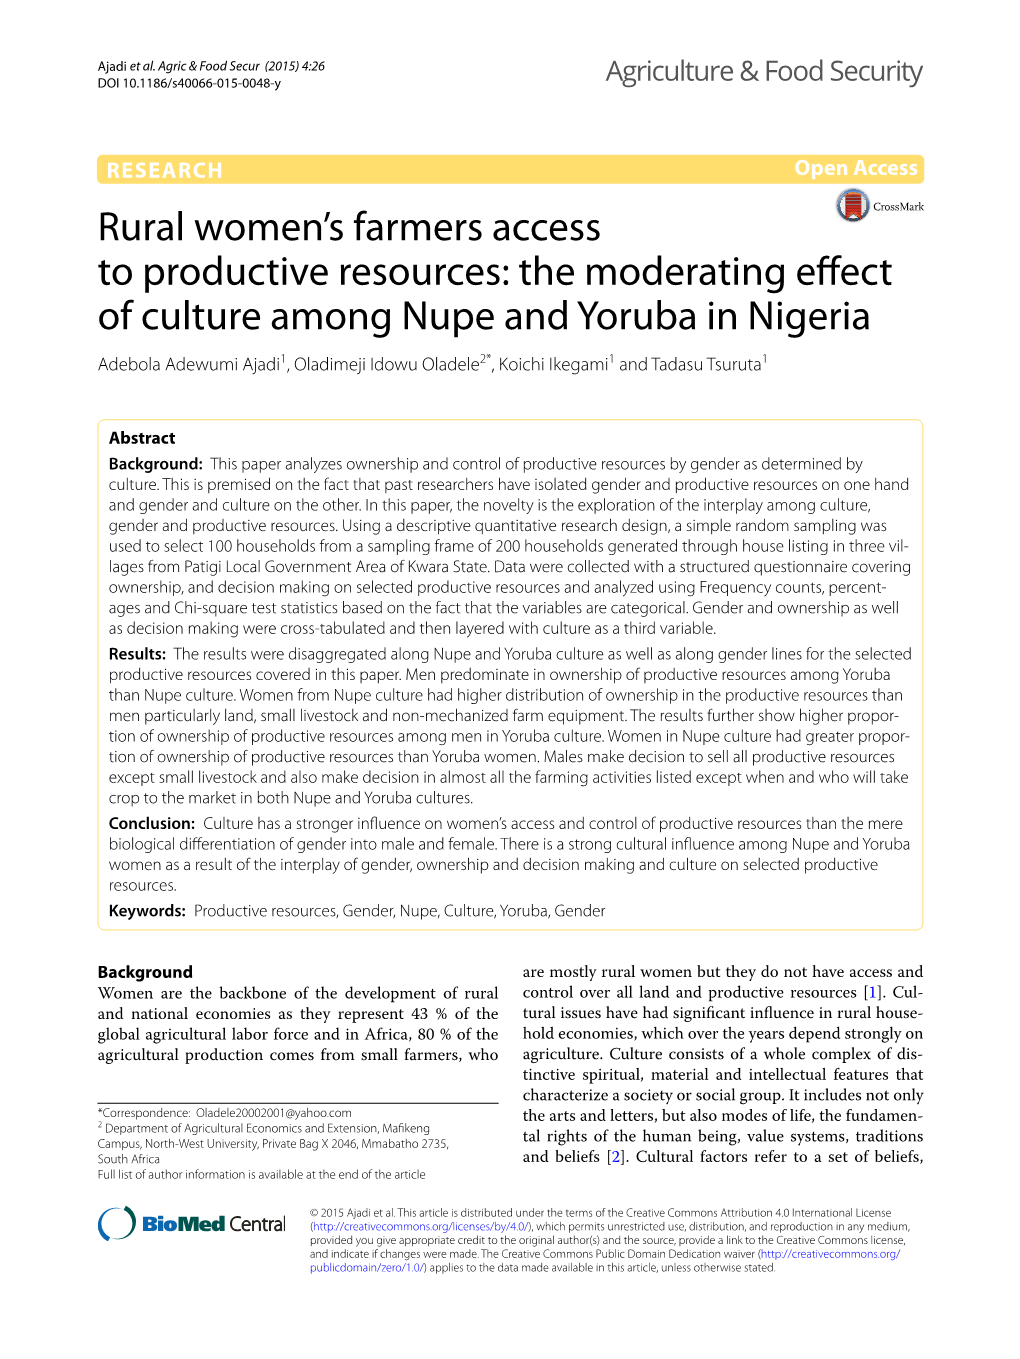 Rural Women's Farmers Access to Productive Resources